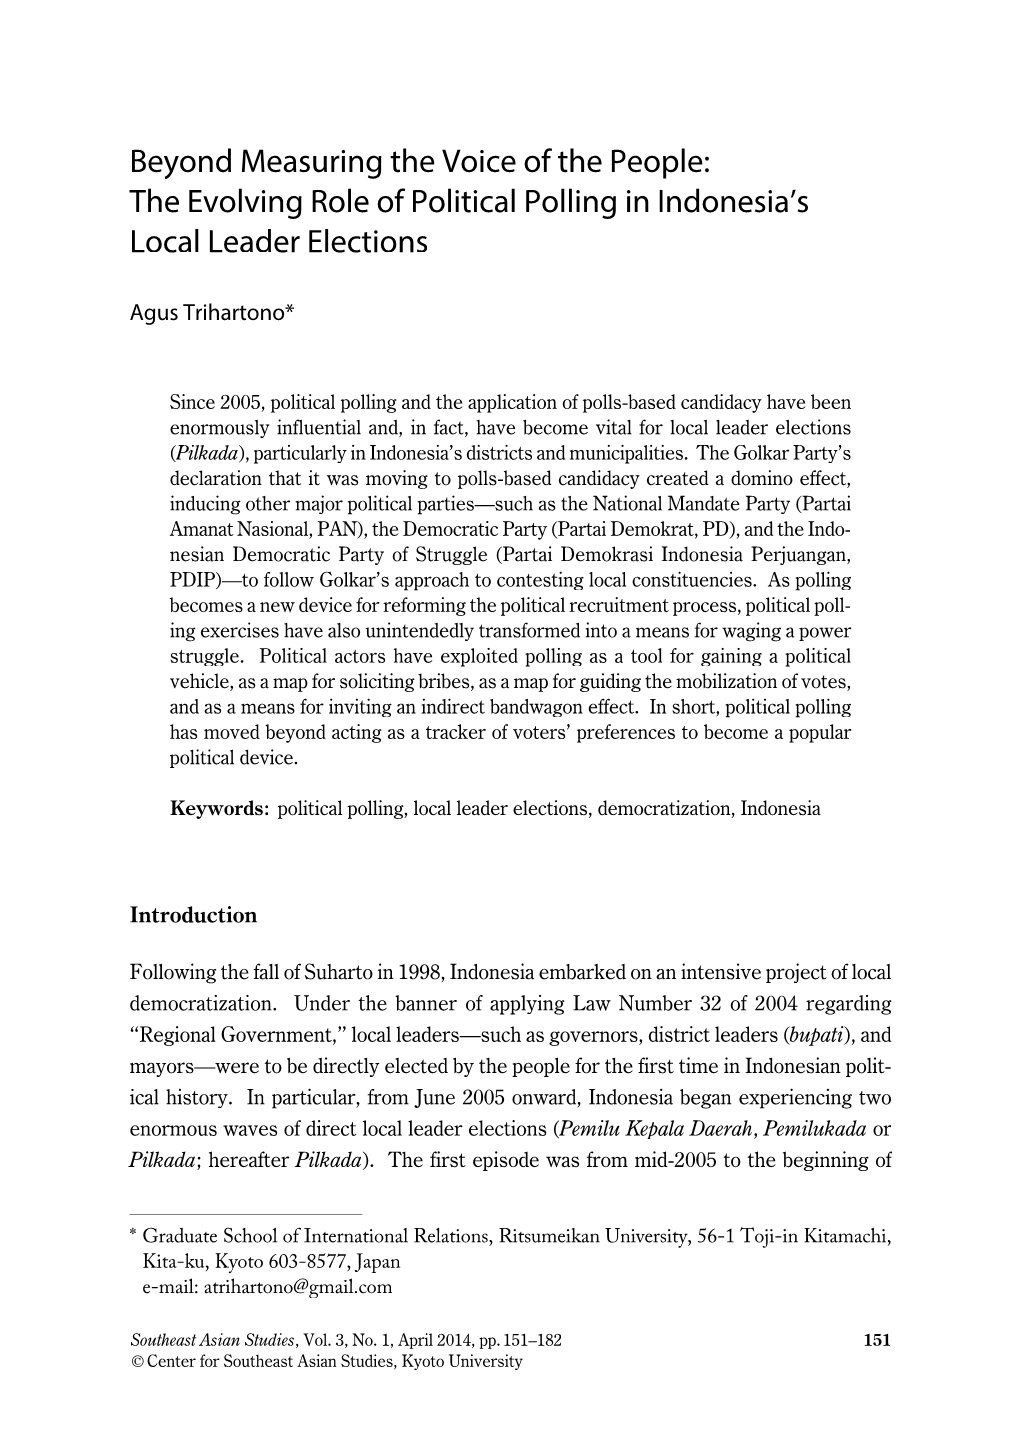 The Evolving Role of Political Polling in Indonesia's Local Leader Elections